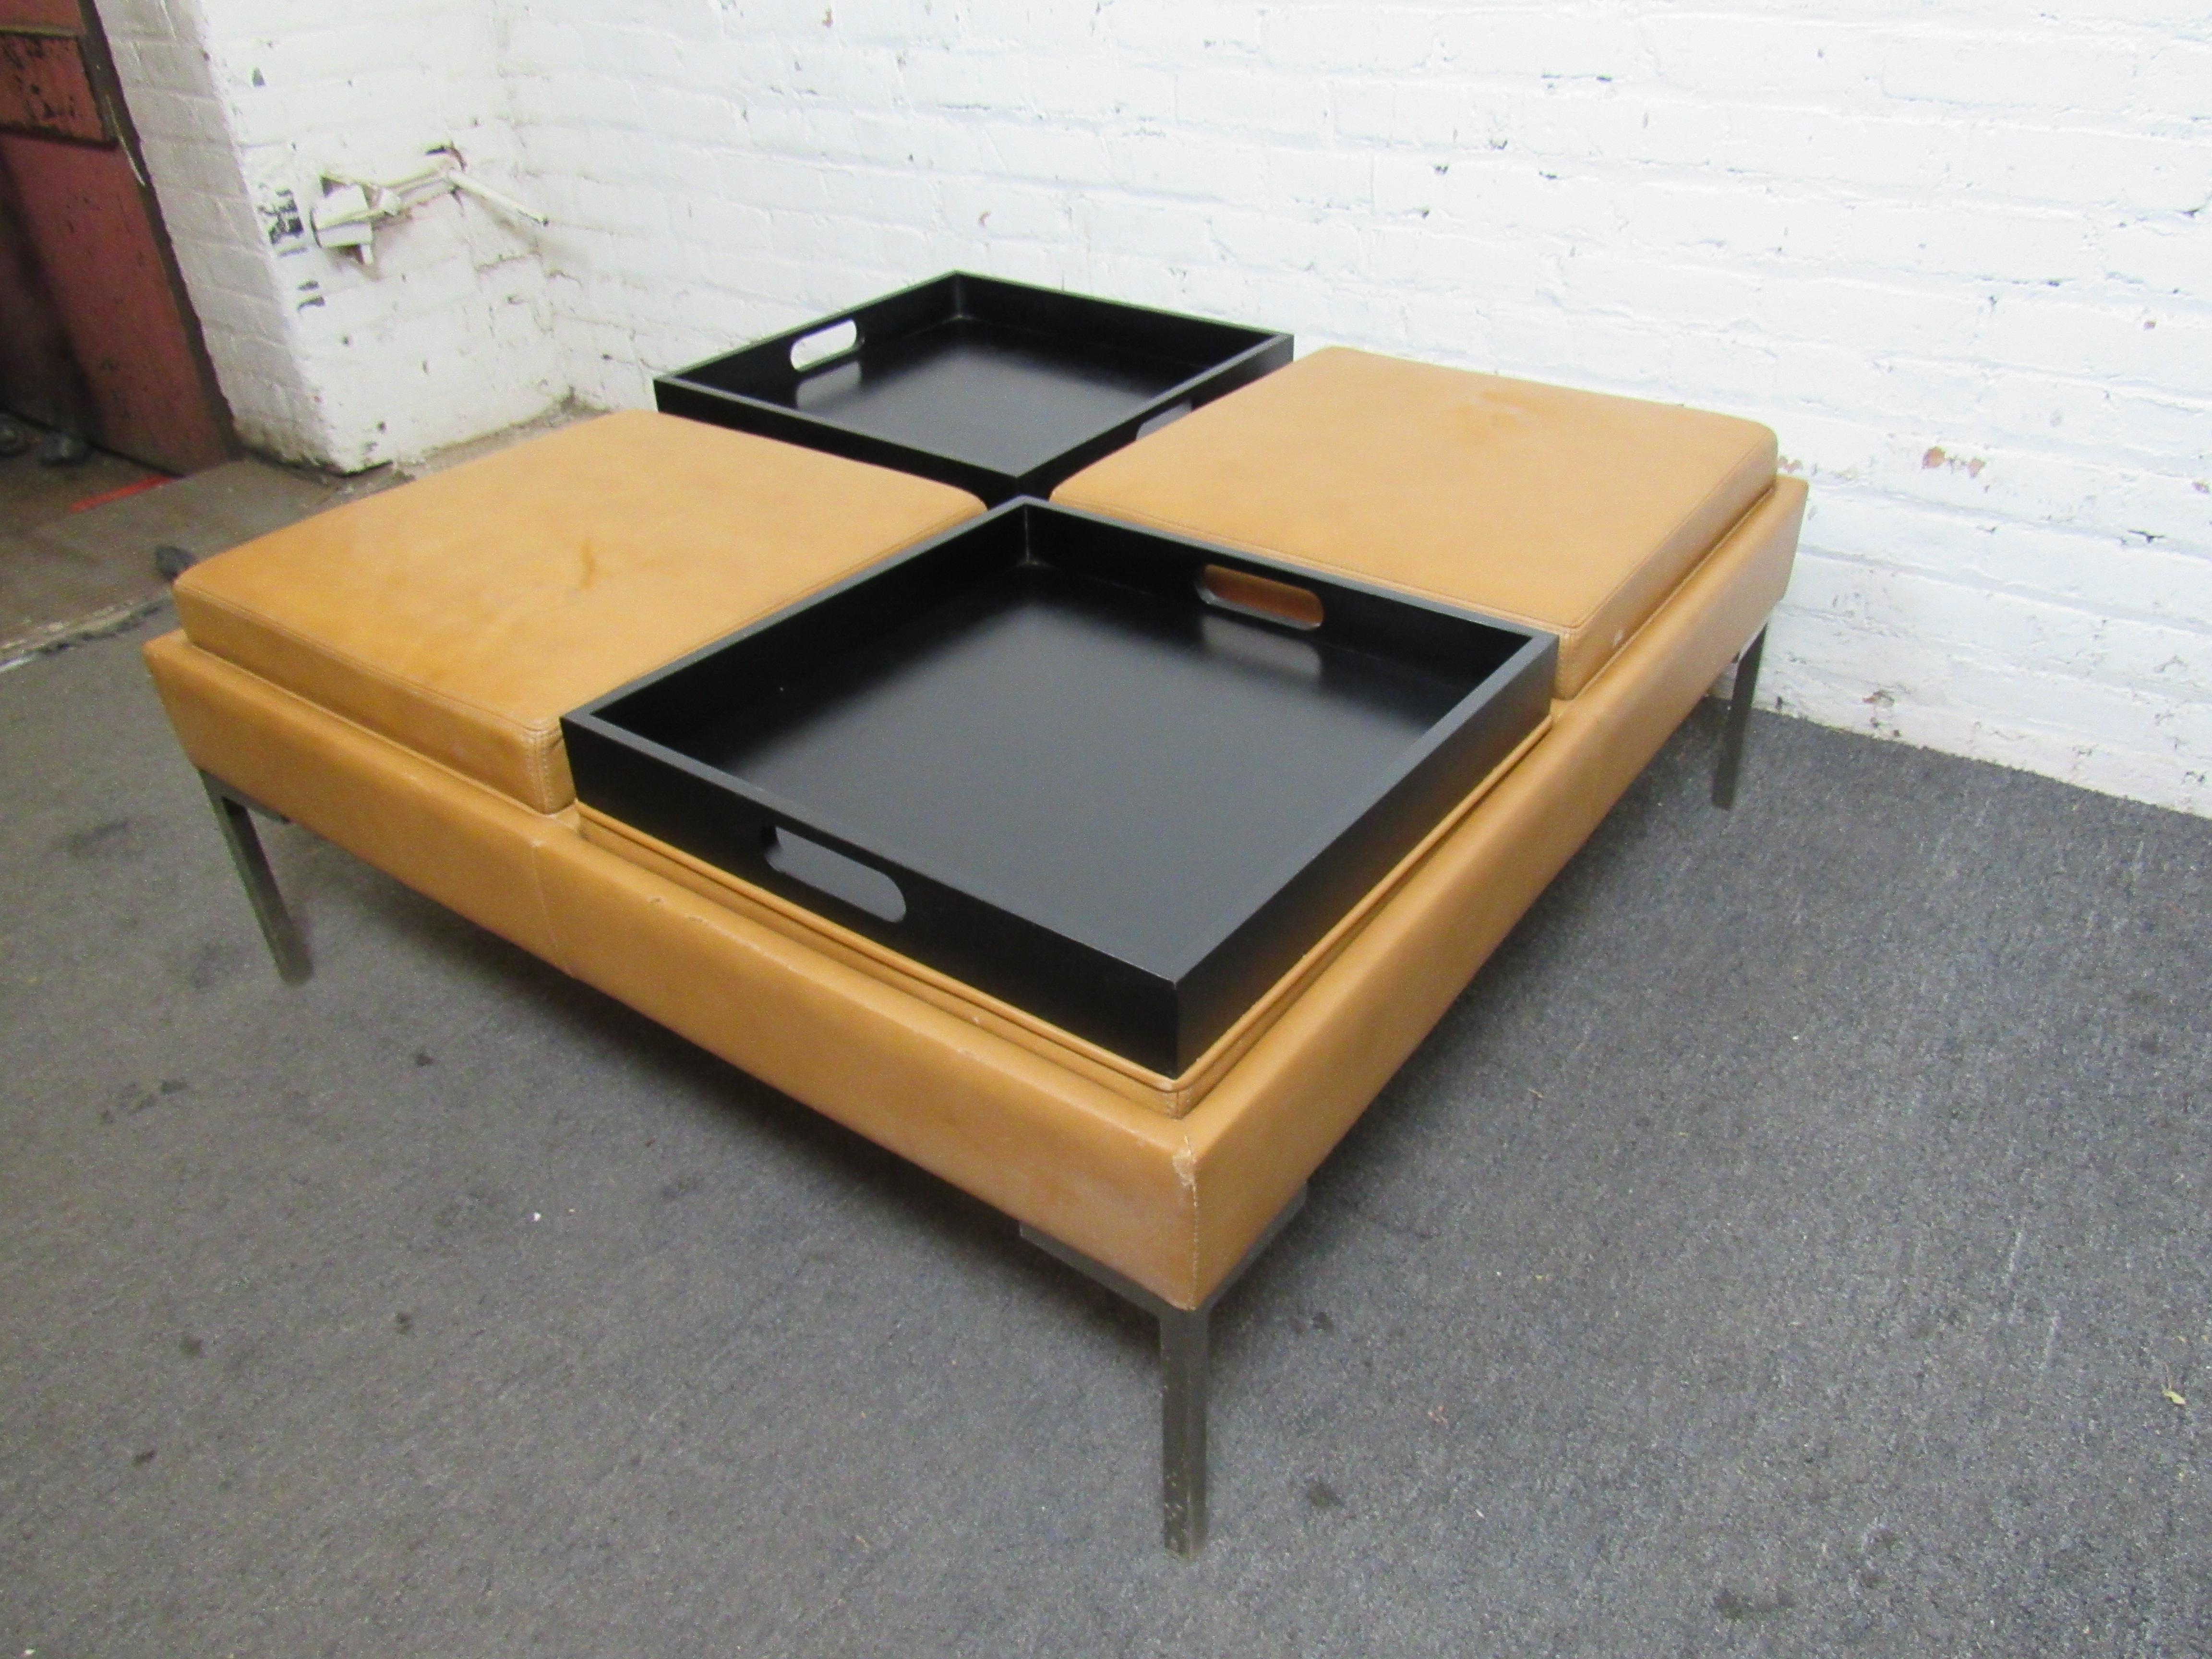 Unique leather bench with reversable tray cushions. Could function as an informal table to sit around. 
Location: Brooklyn NY.